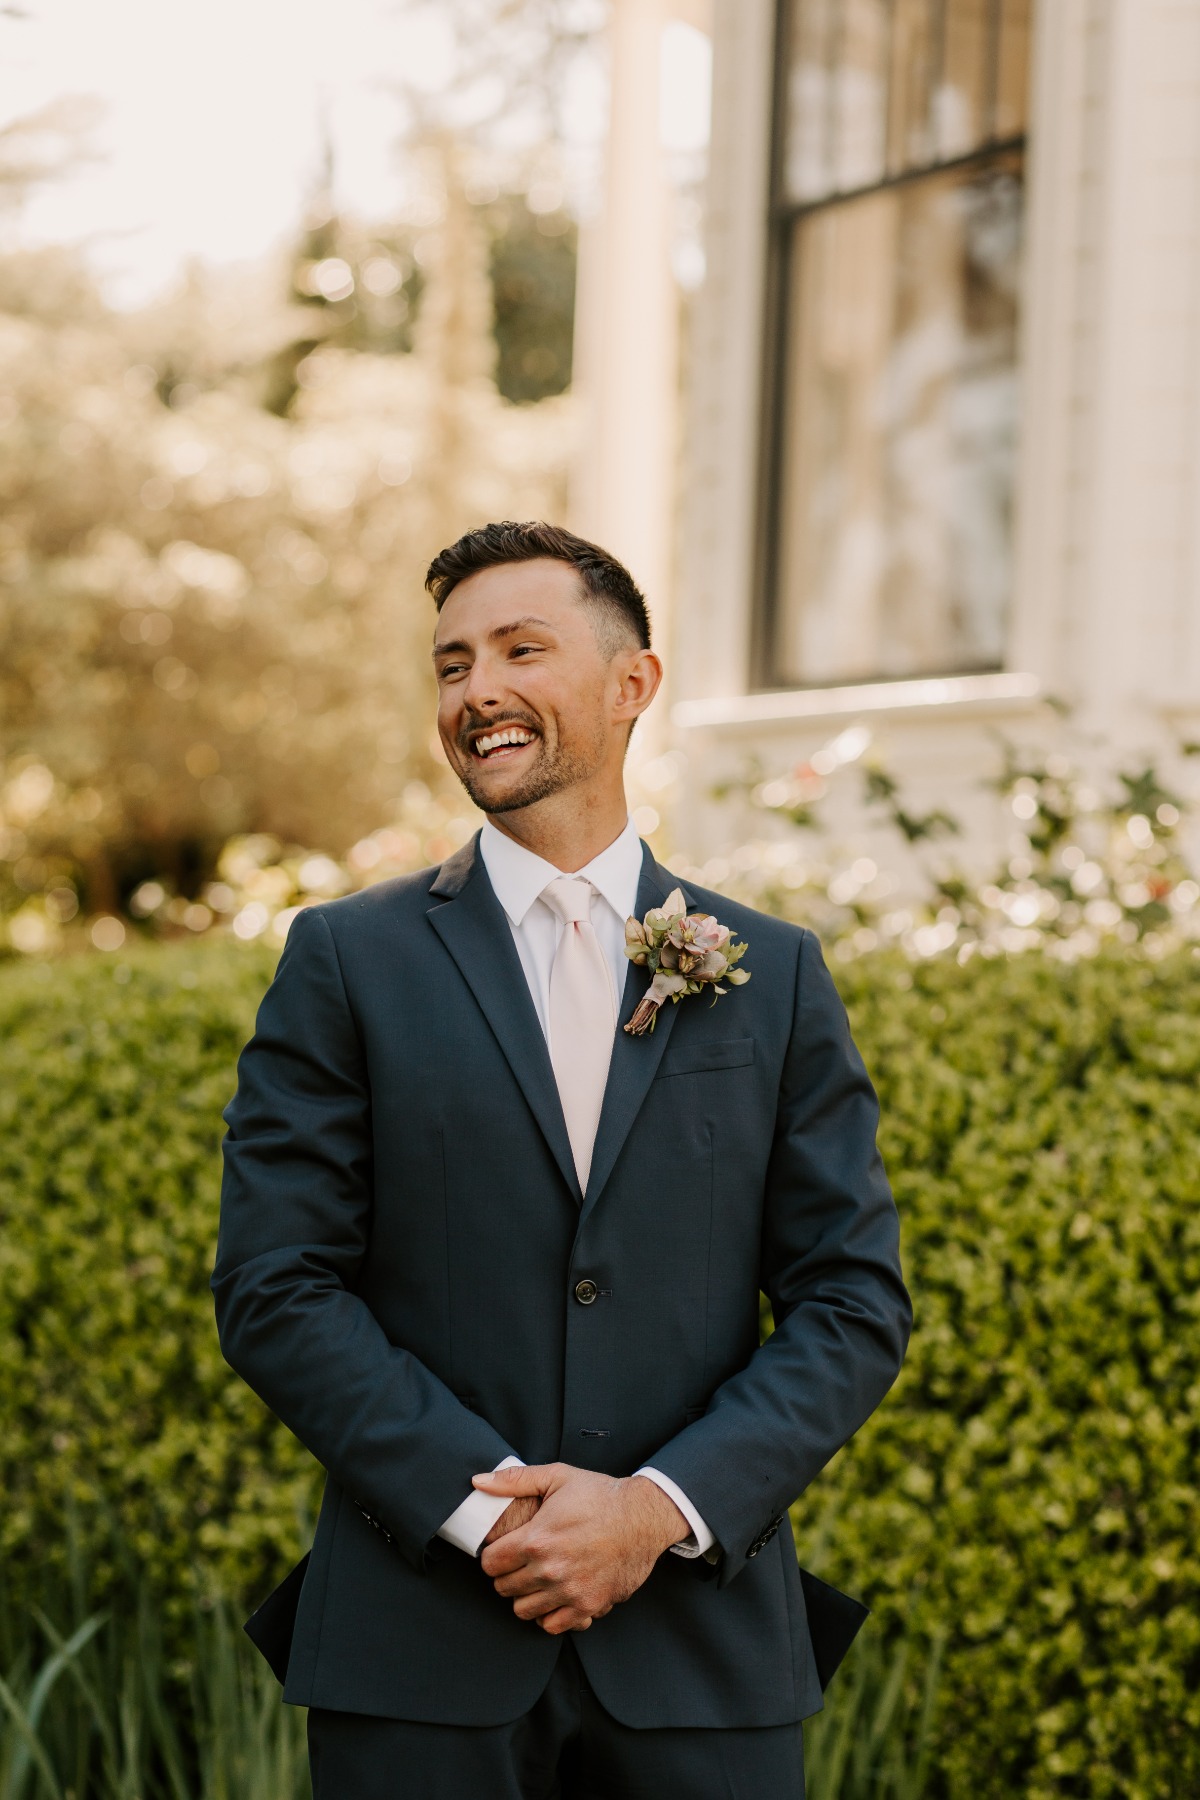 pink and navy groom suit idea